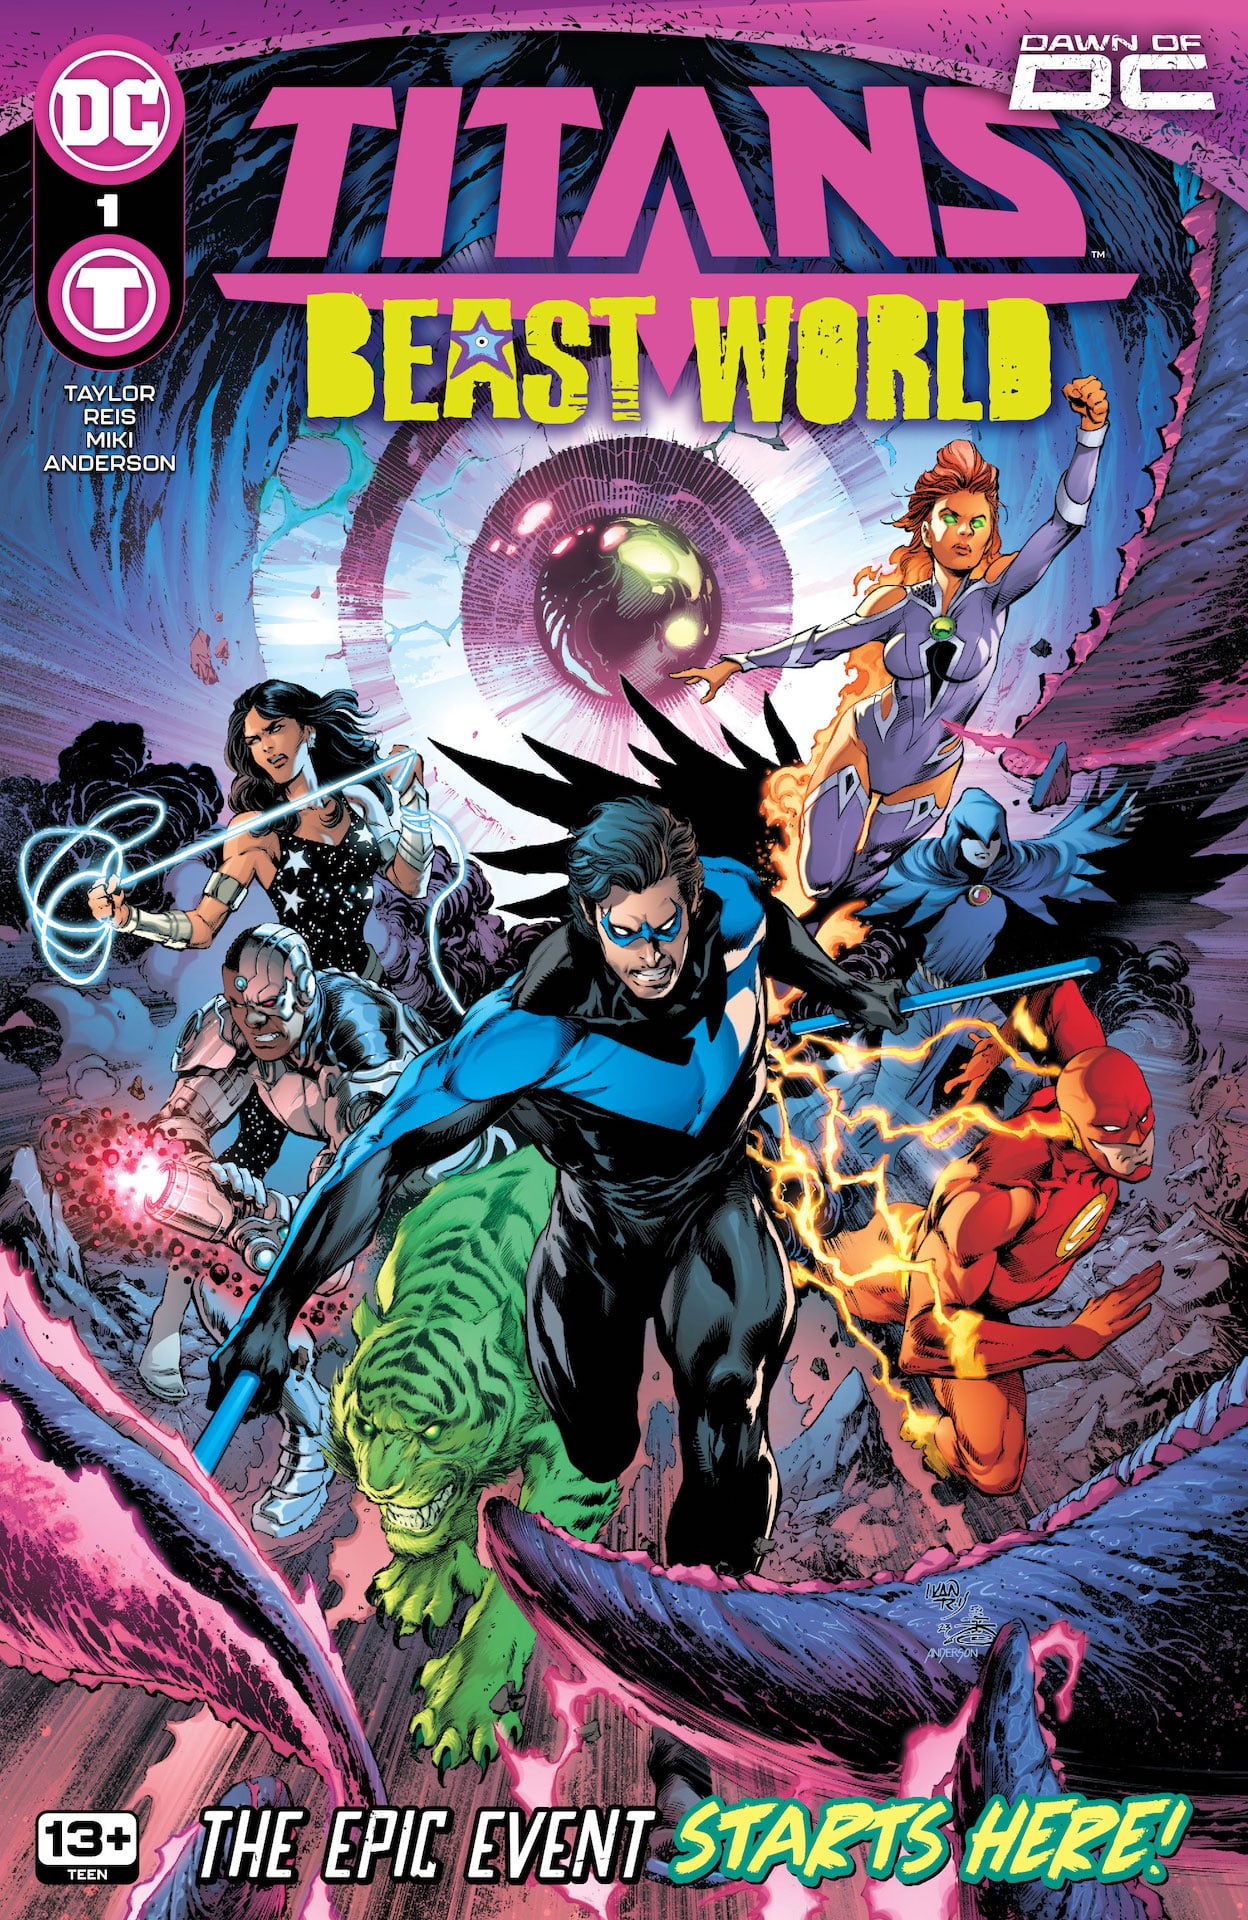 DC Preview: Titans: Beast World #1